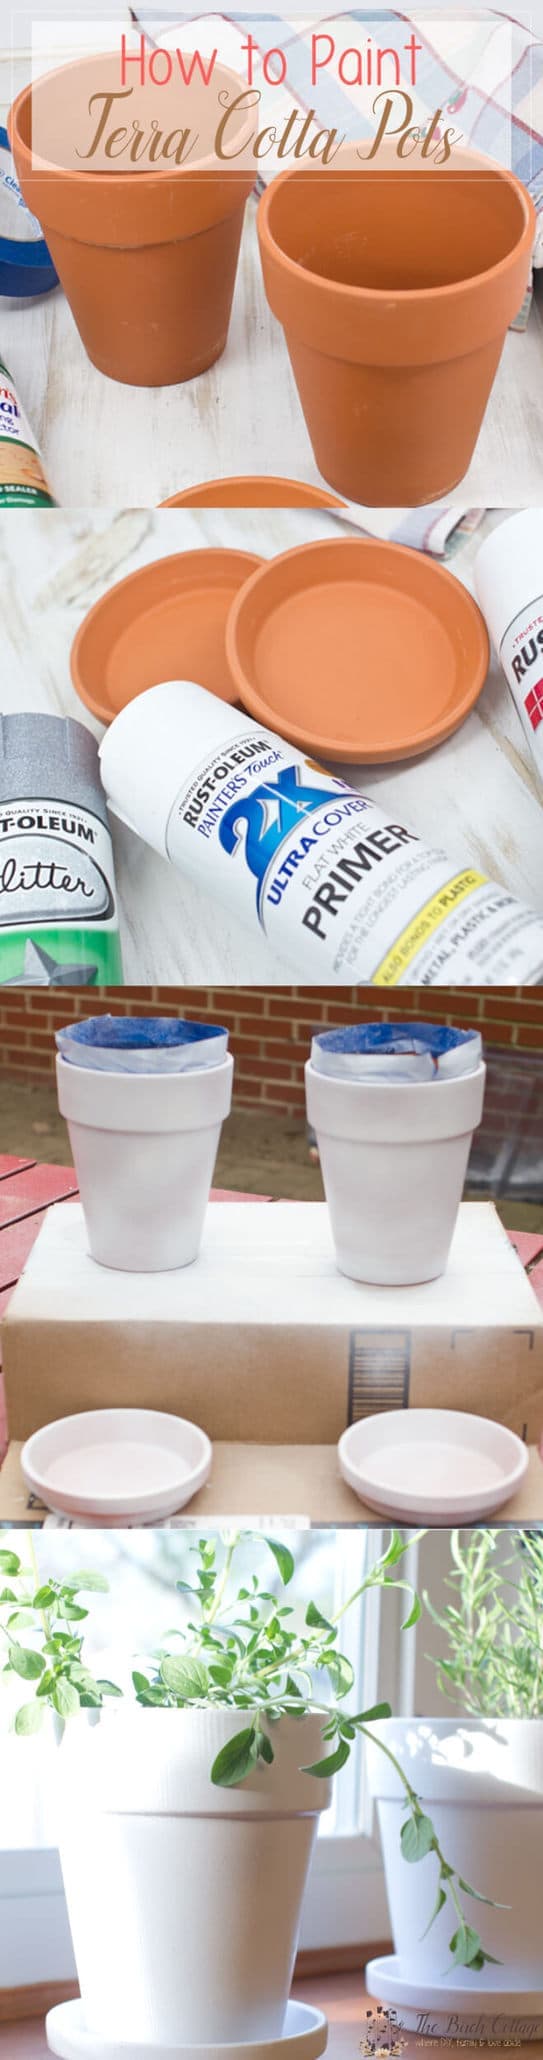 Paint Terra Cotta Pots With Spray, How To Paint Outdoor Terracotta Pots